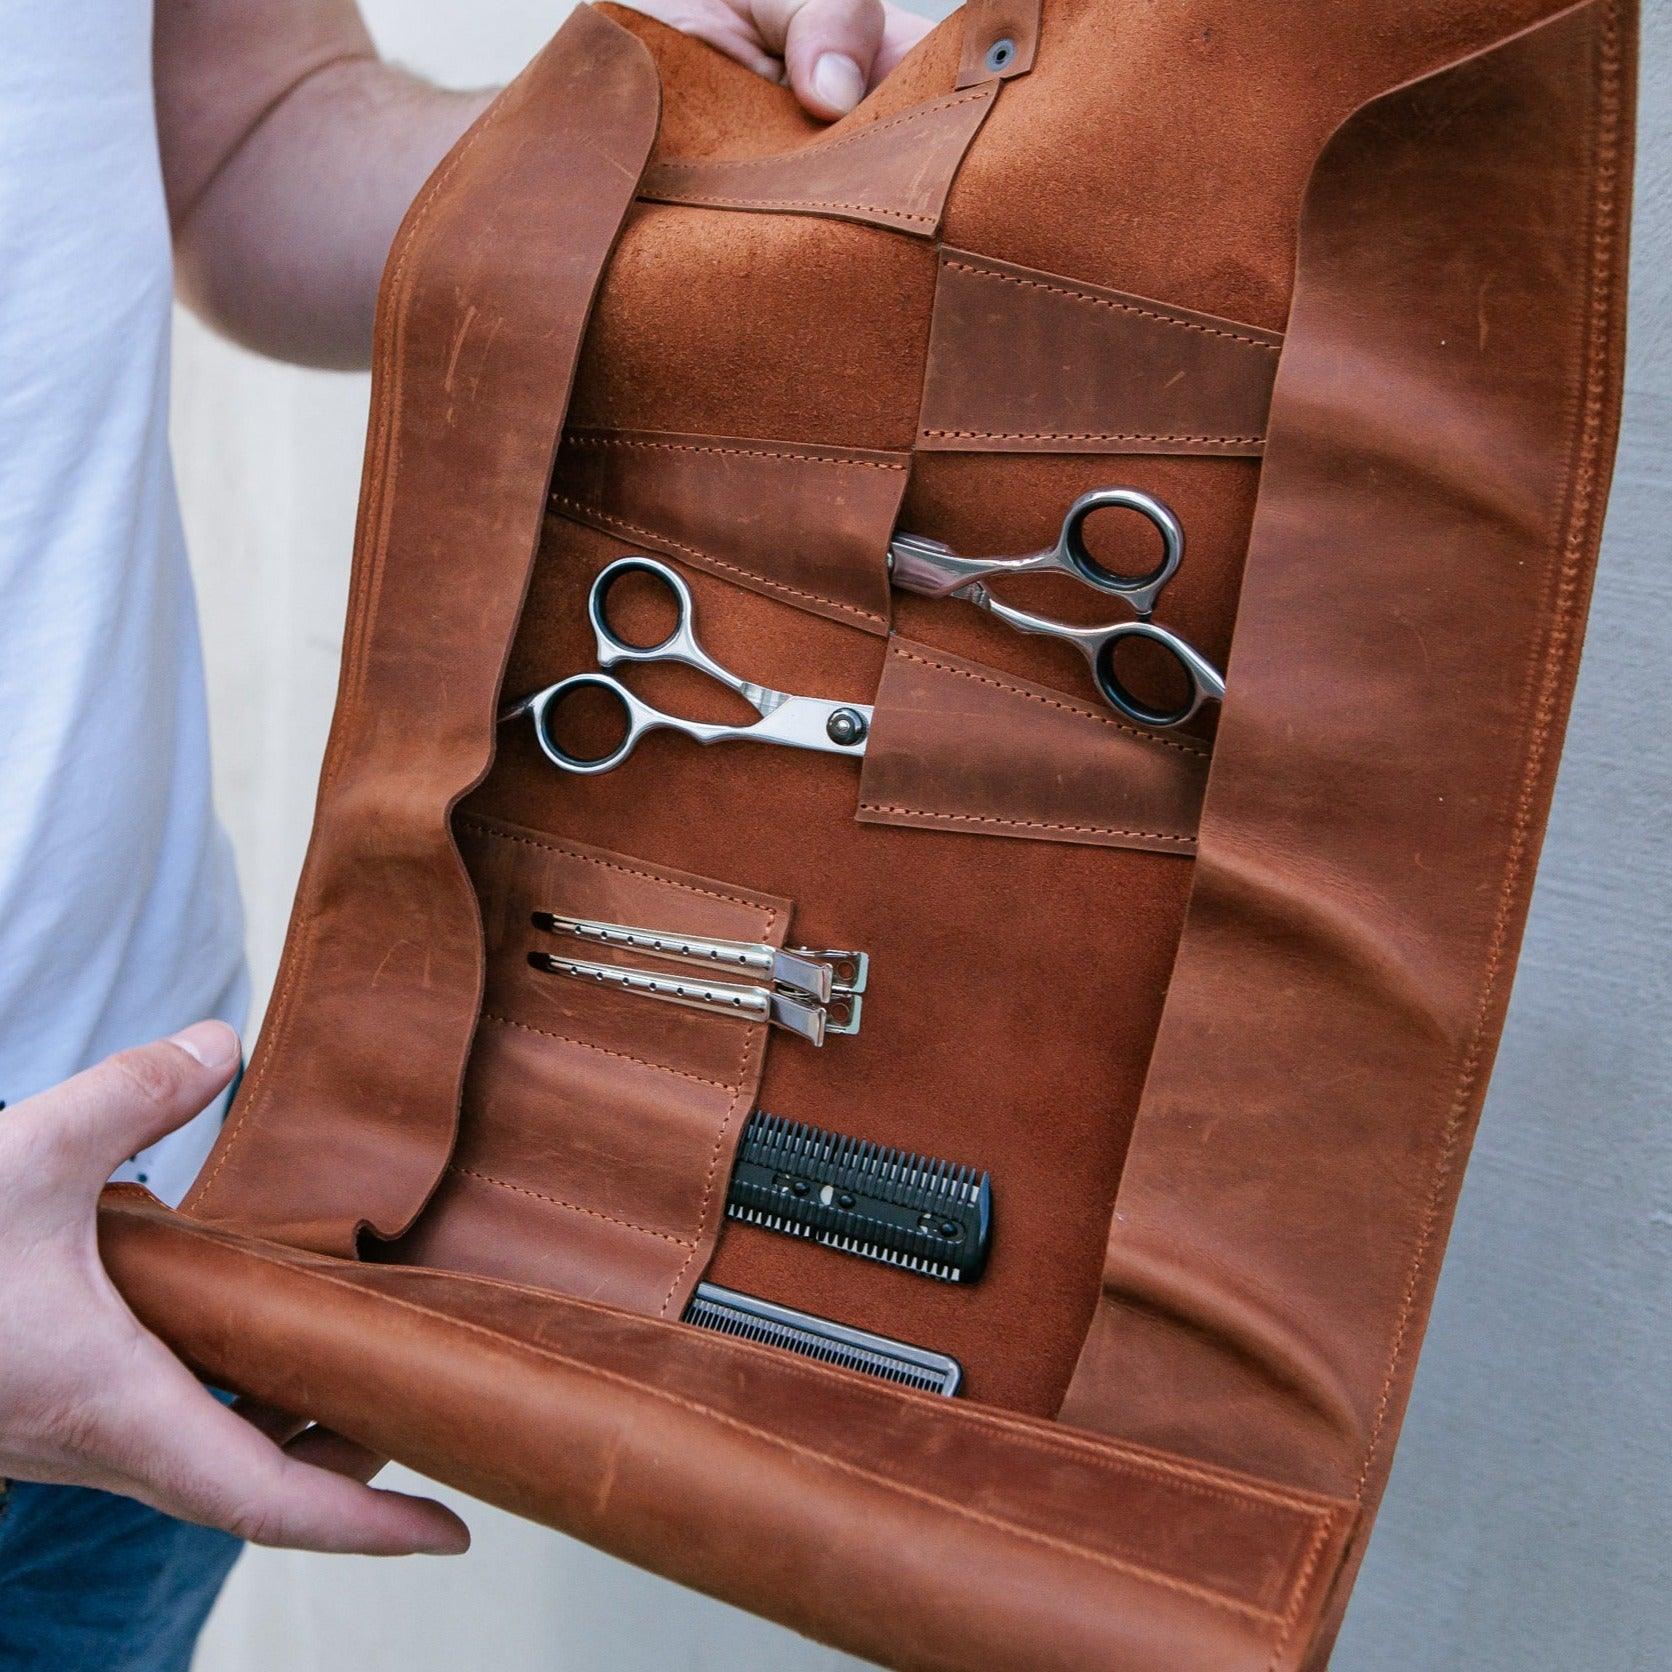 Personalized Leather Scissors Roll